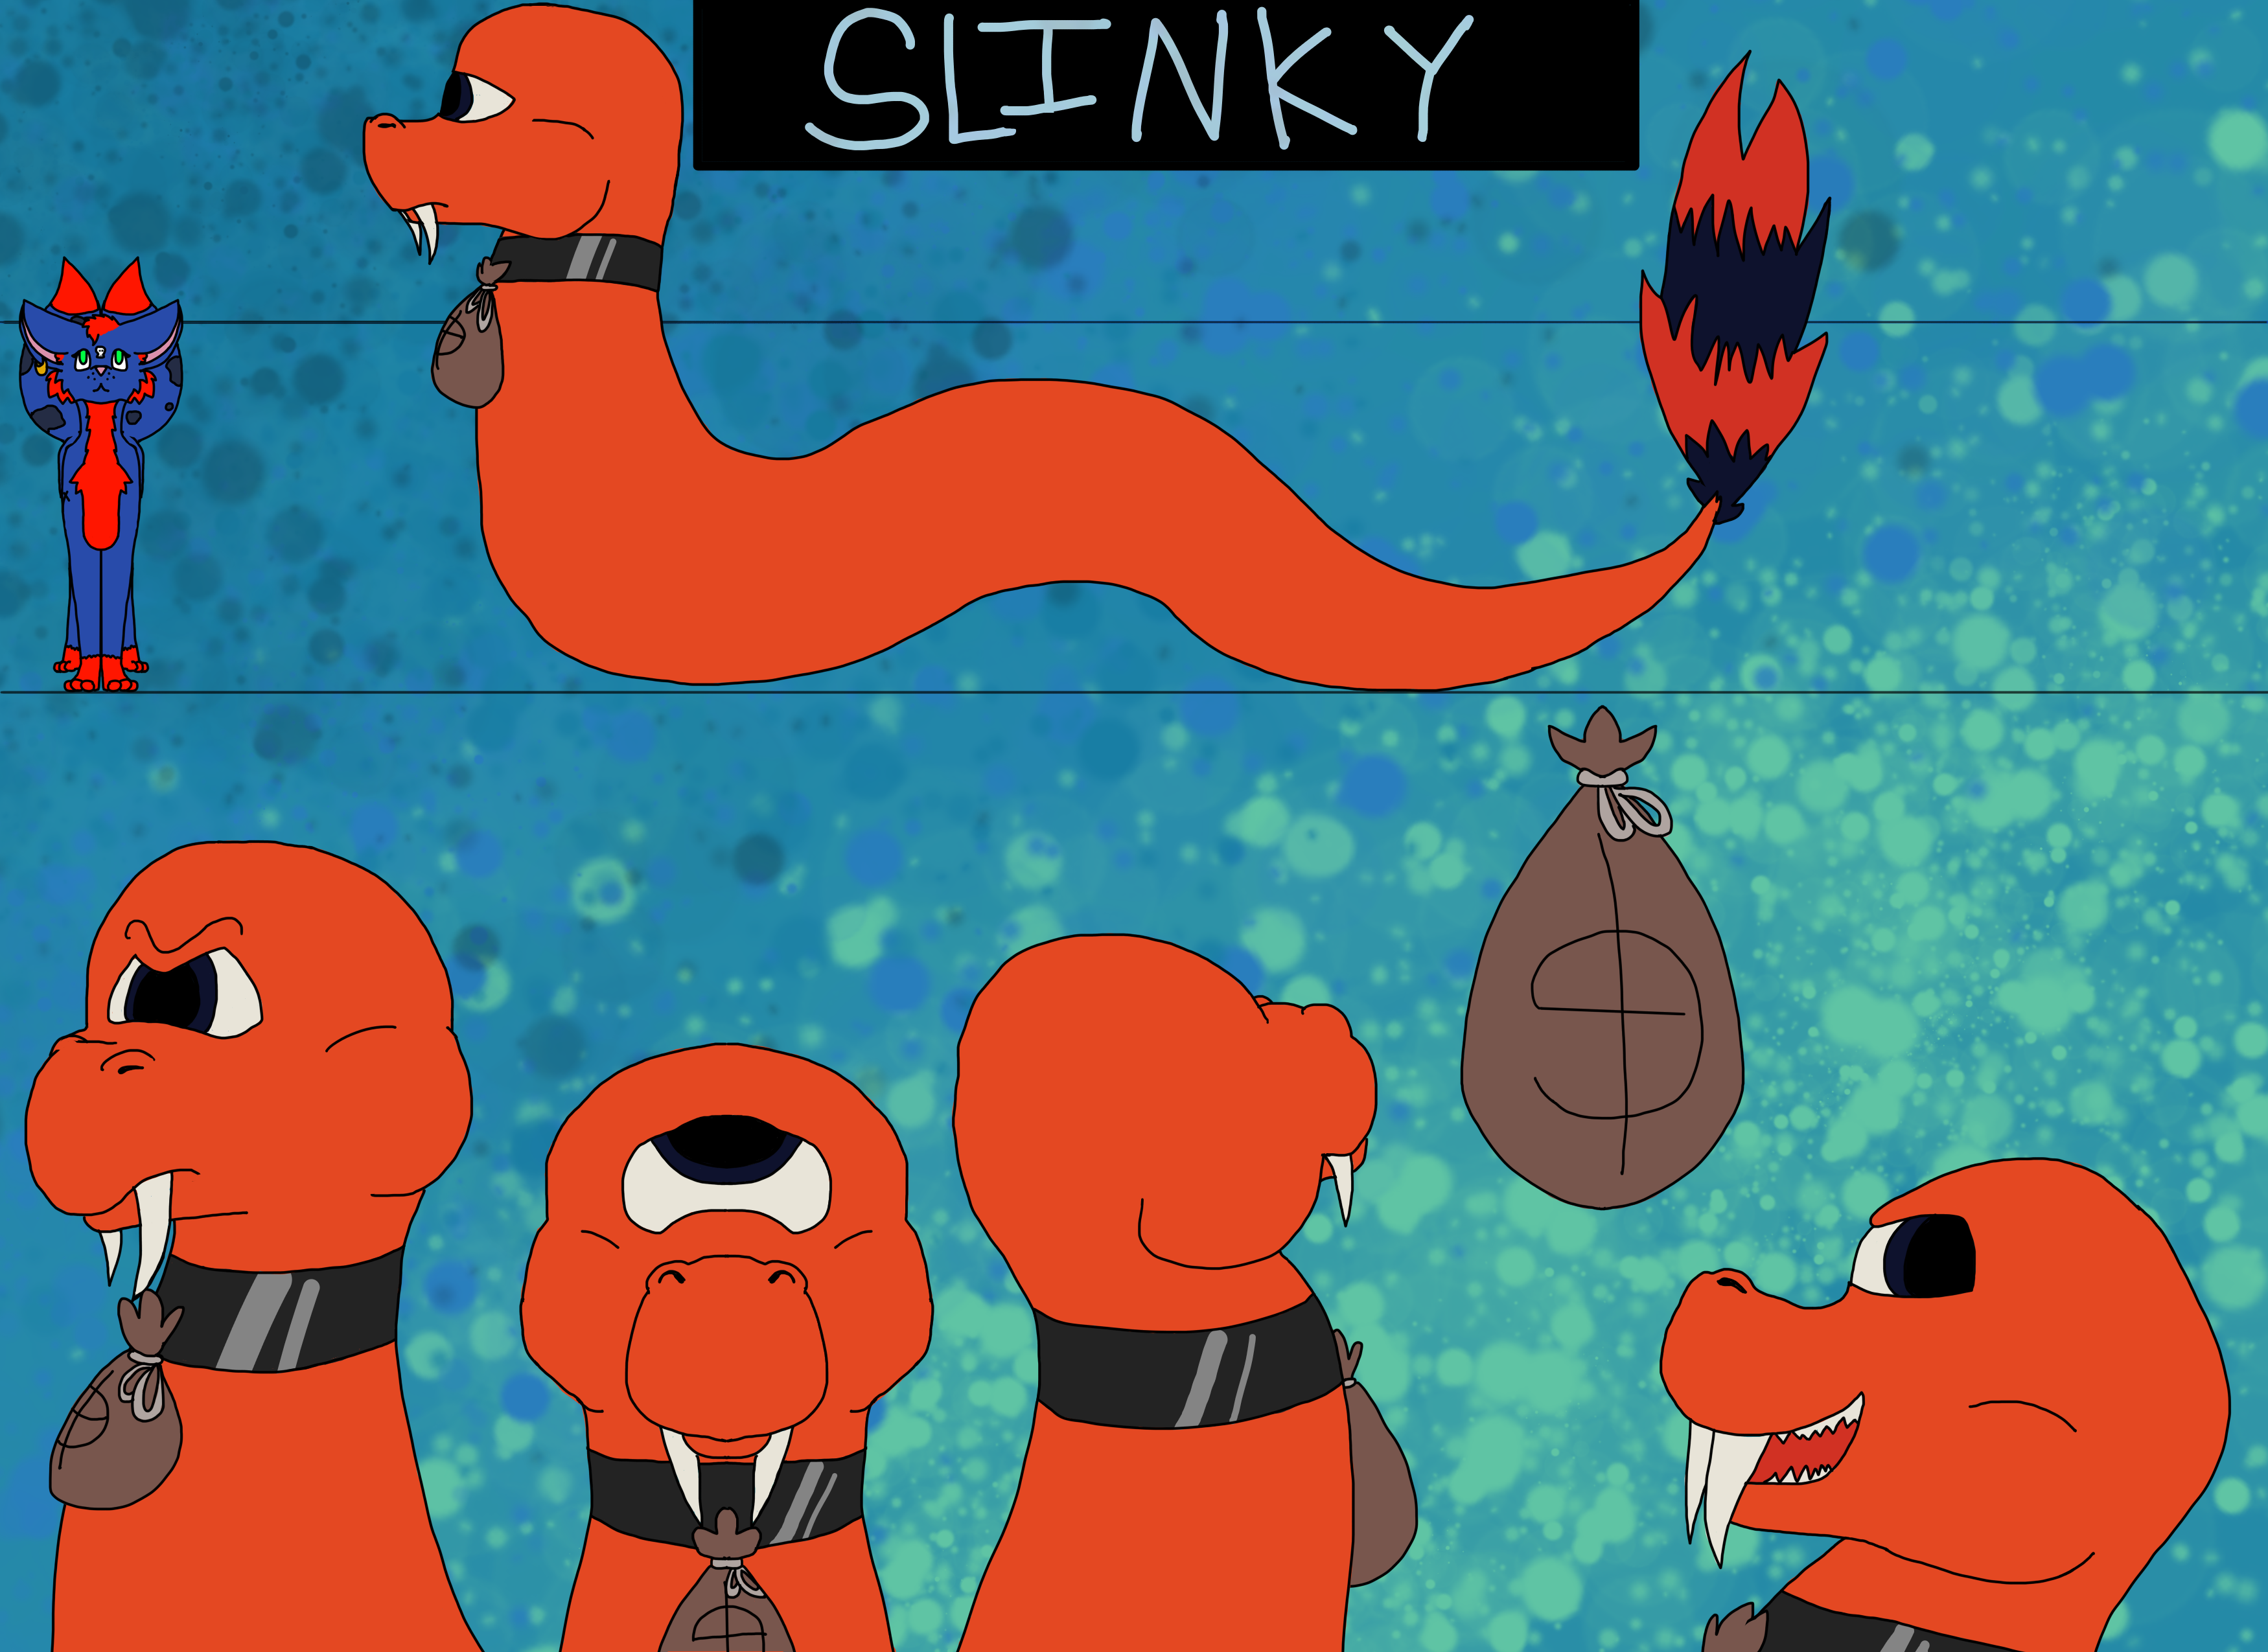 character sheet of an orange snake with a raccoon tail and a sack of money hung around his neck